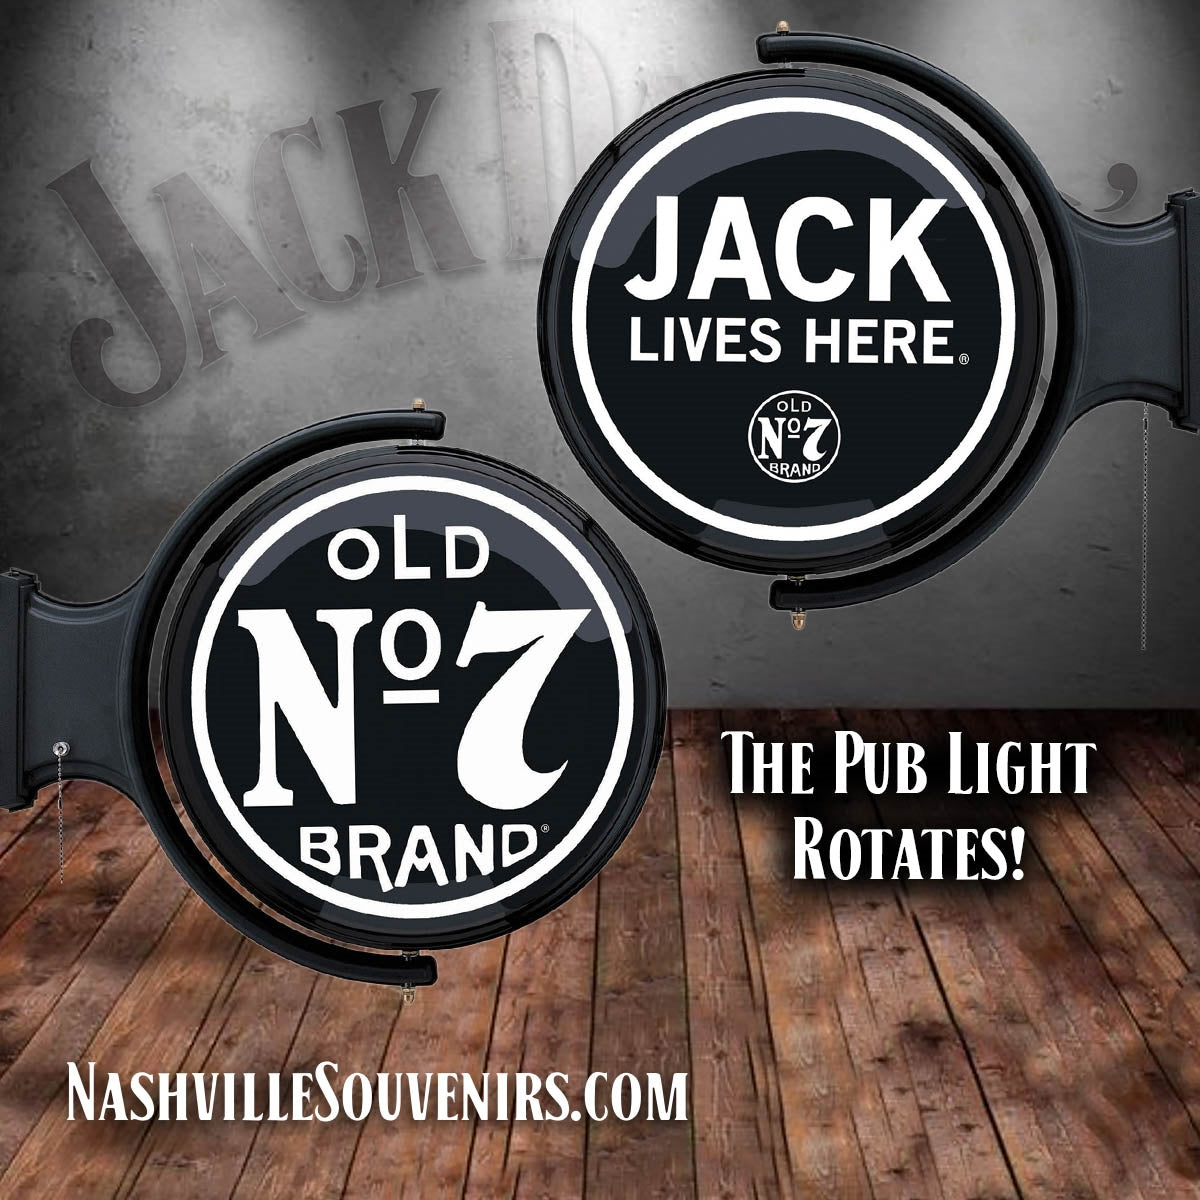 This Jack Daniel's pub light is only one of our many great man cave wall ideas we offer. Friends will love hanging out in your home bar while sipping that mellow Jack Daniel's Tennessee Whiskey and watching the rotating JD pub light.